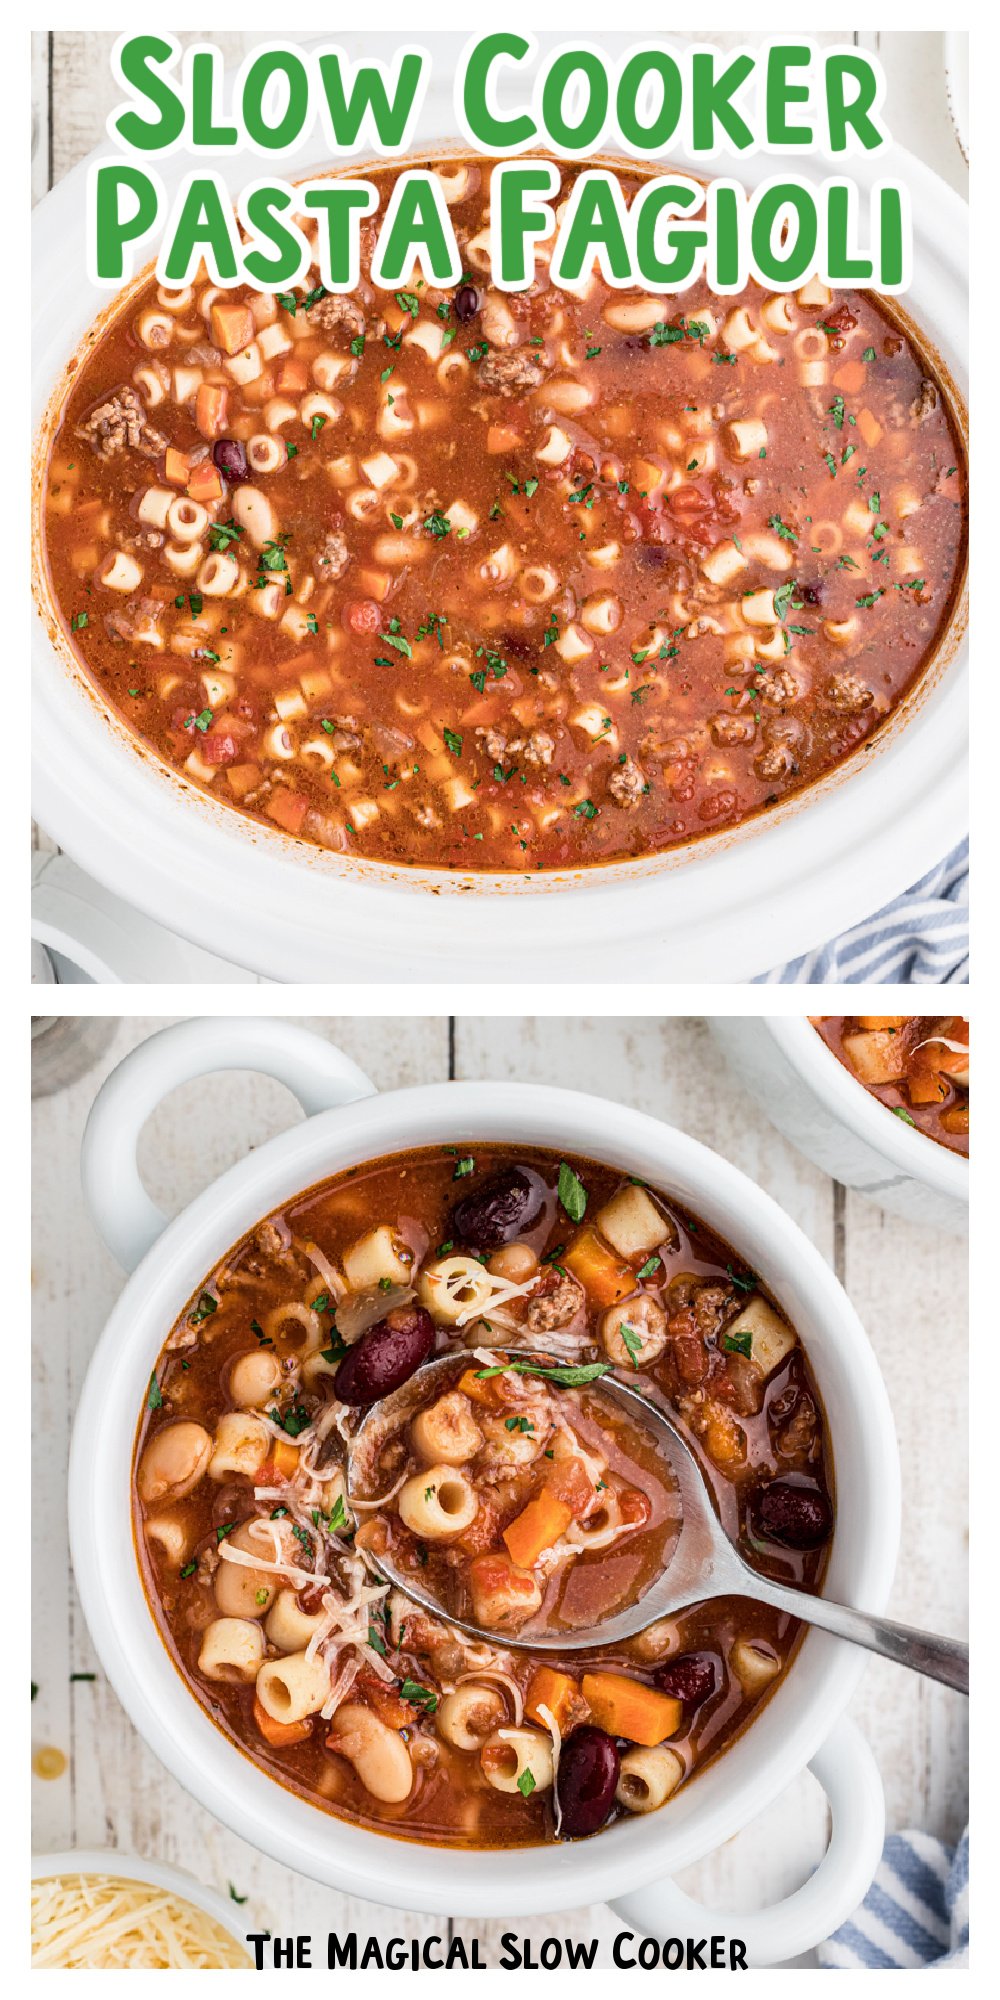 Slow Cooker Pasta Fagioli Soup - The Magical Slow Cooker